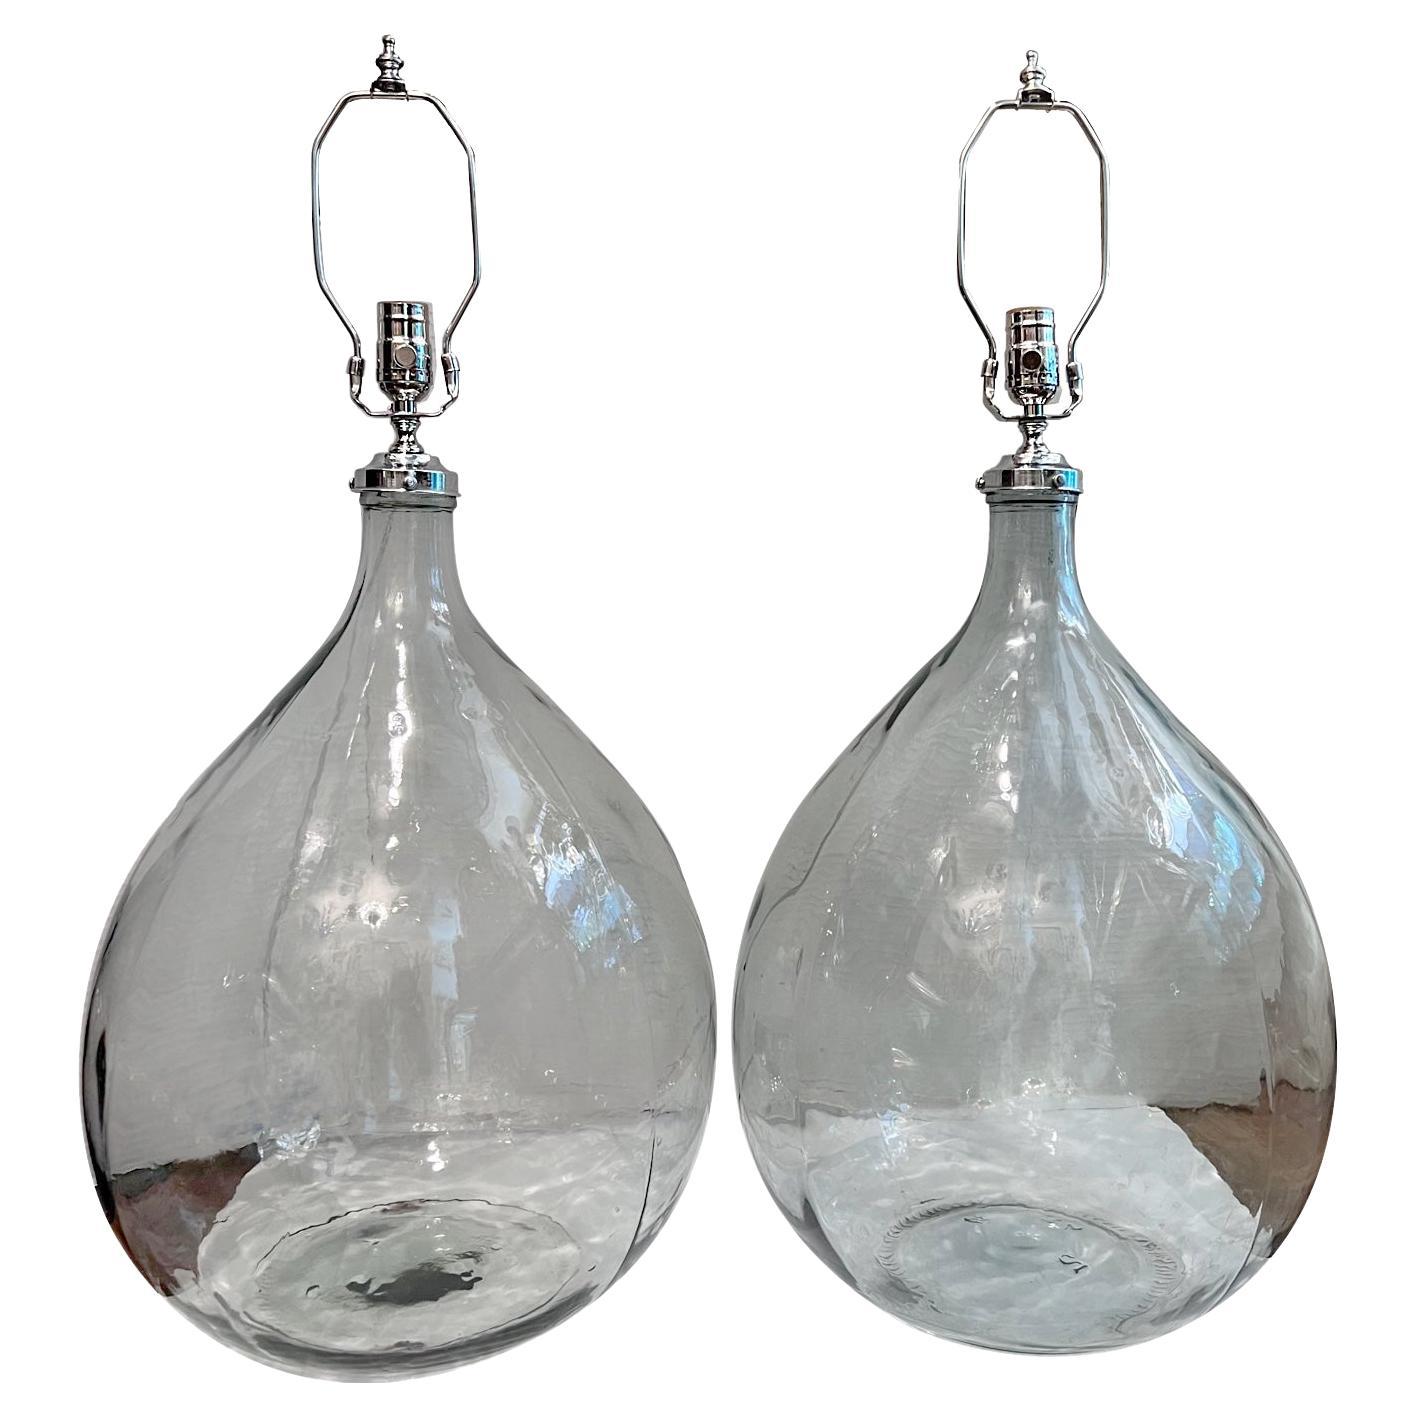 Pair of Large Glass Lamps